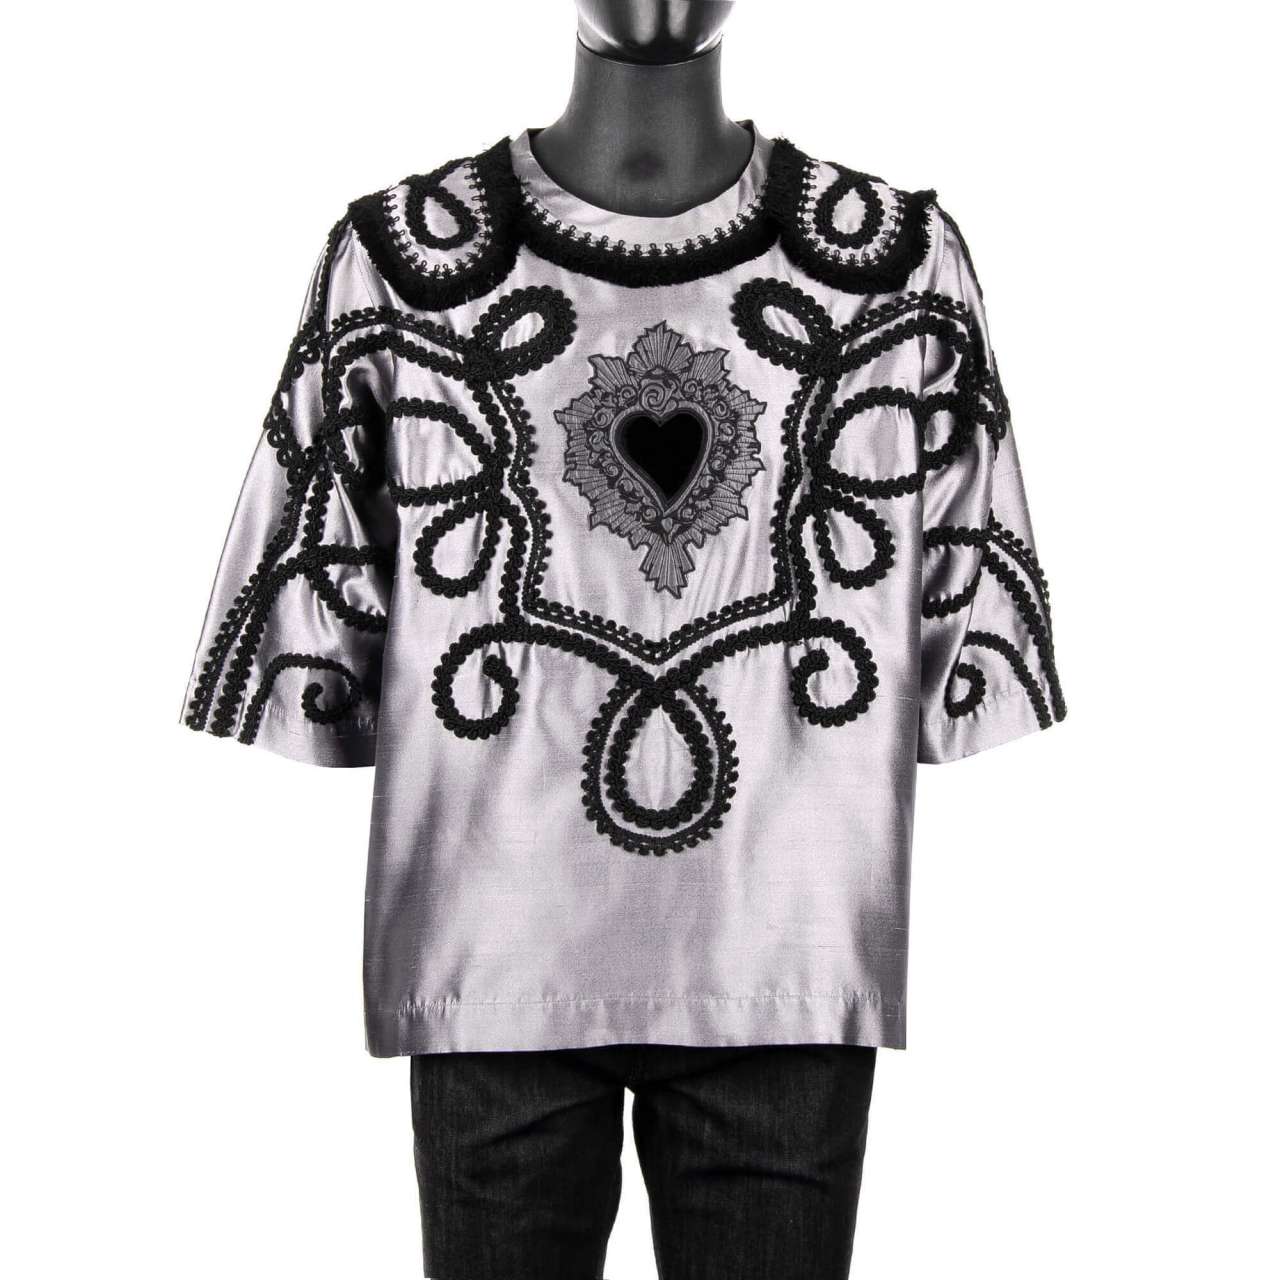 Dolce & Gabbana - Embroidered "Sacred Heart" Shirt Gray 46 For Sale